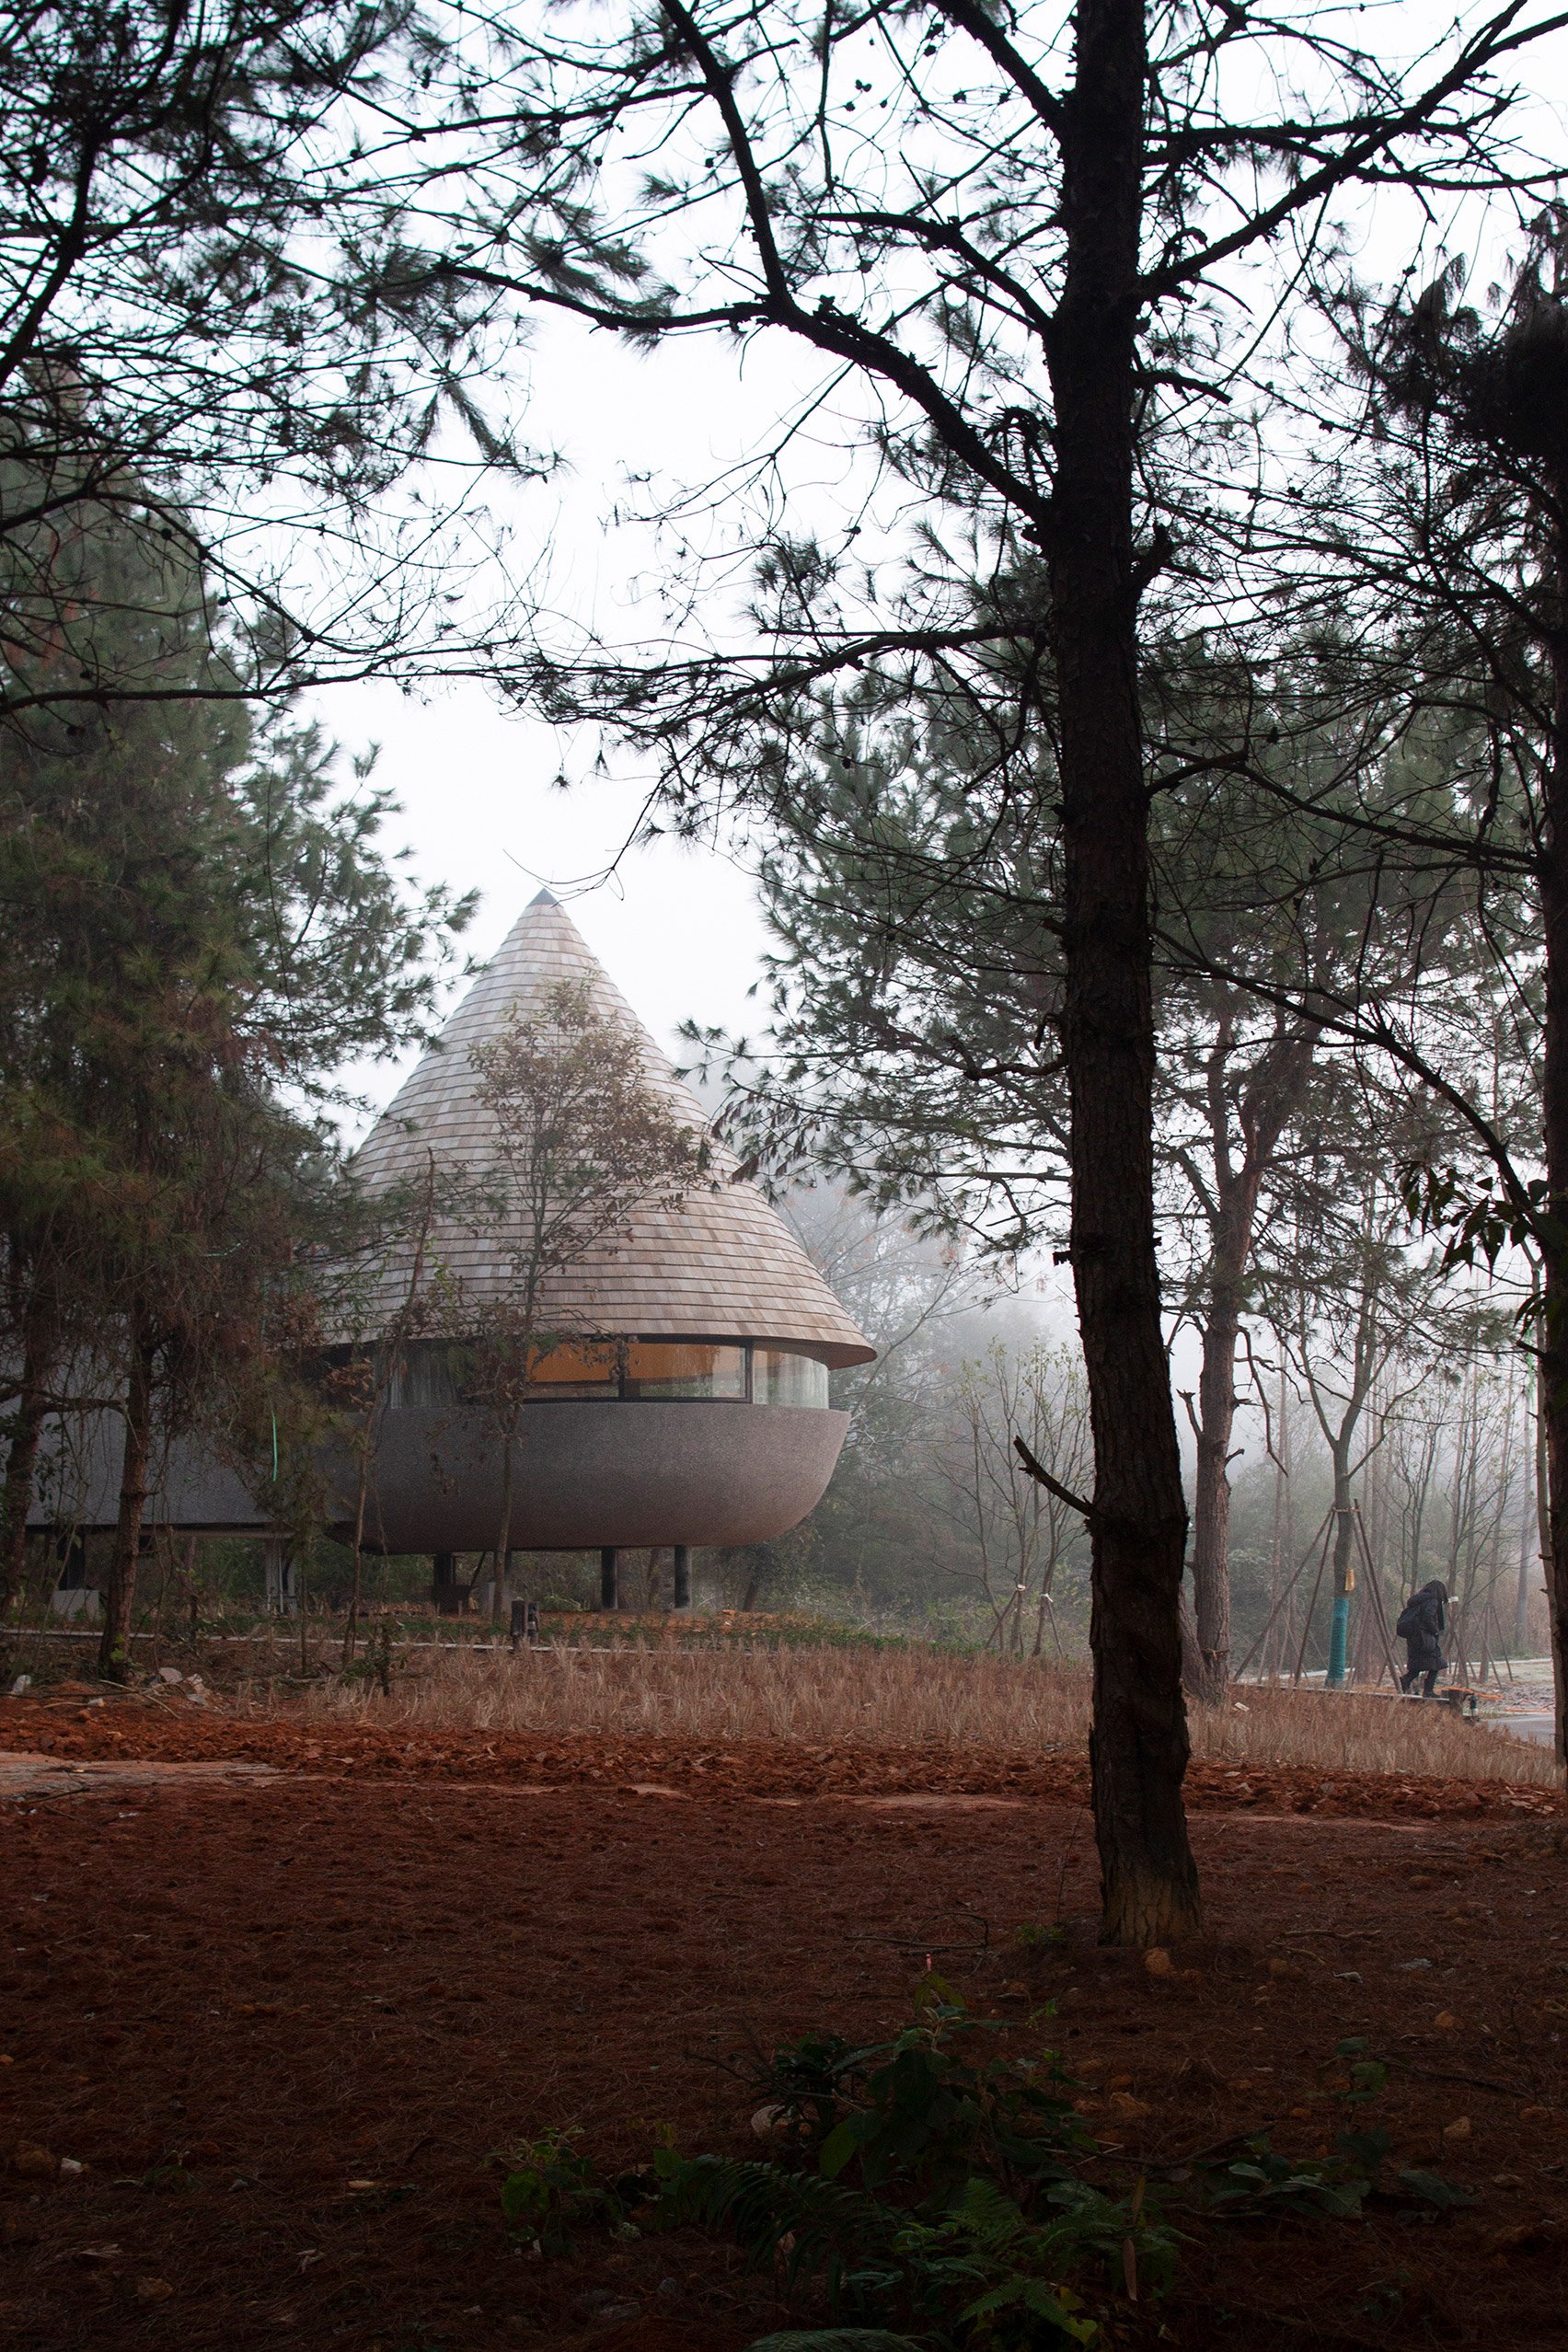 A rural guesthouse with a cone-shaped roof